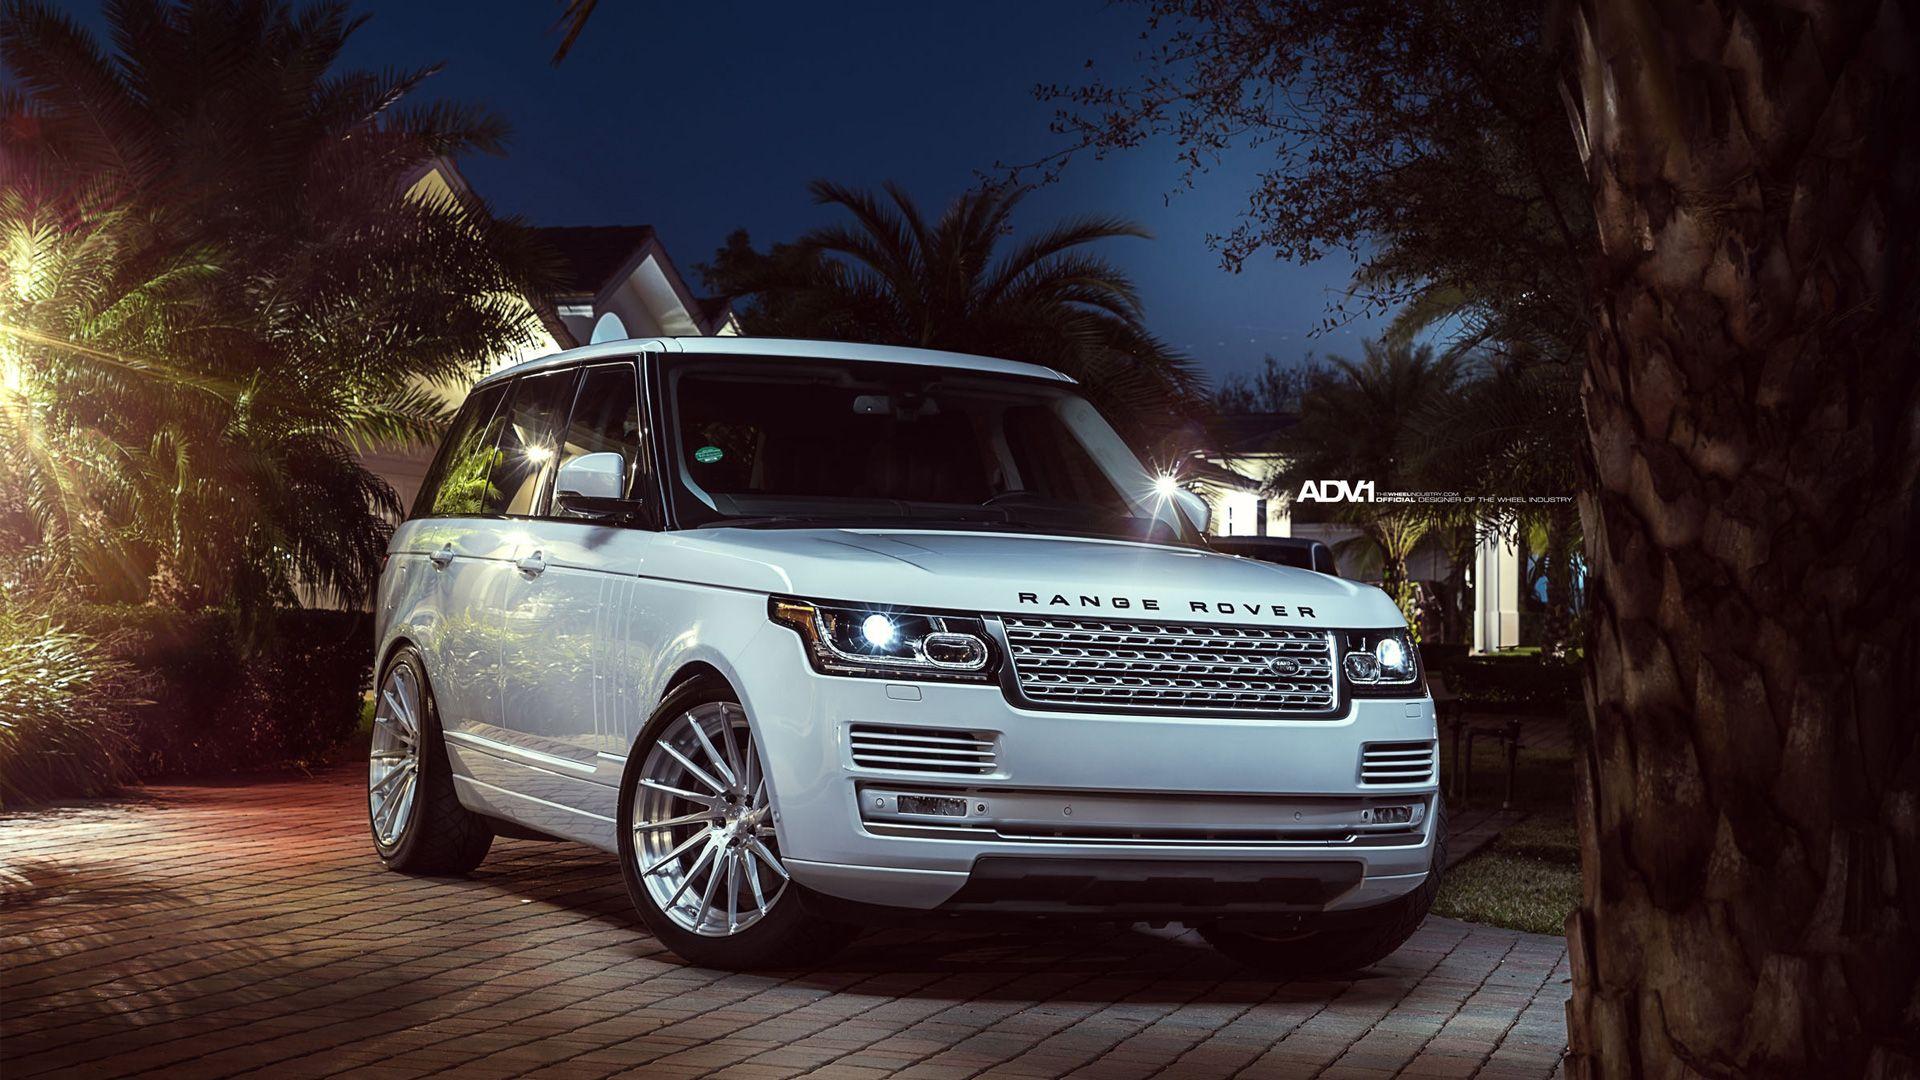 Range Rover Wallpapers - Top Free Range Rover Backgrounds - WallpaperAccess